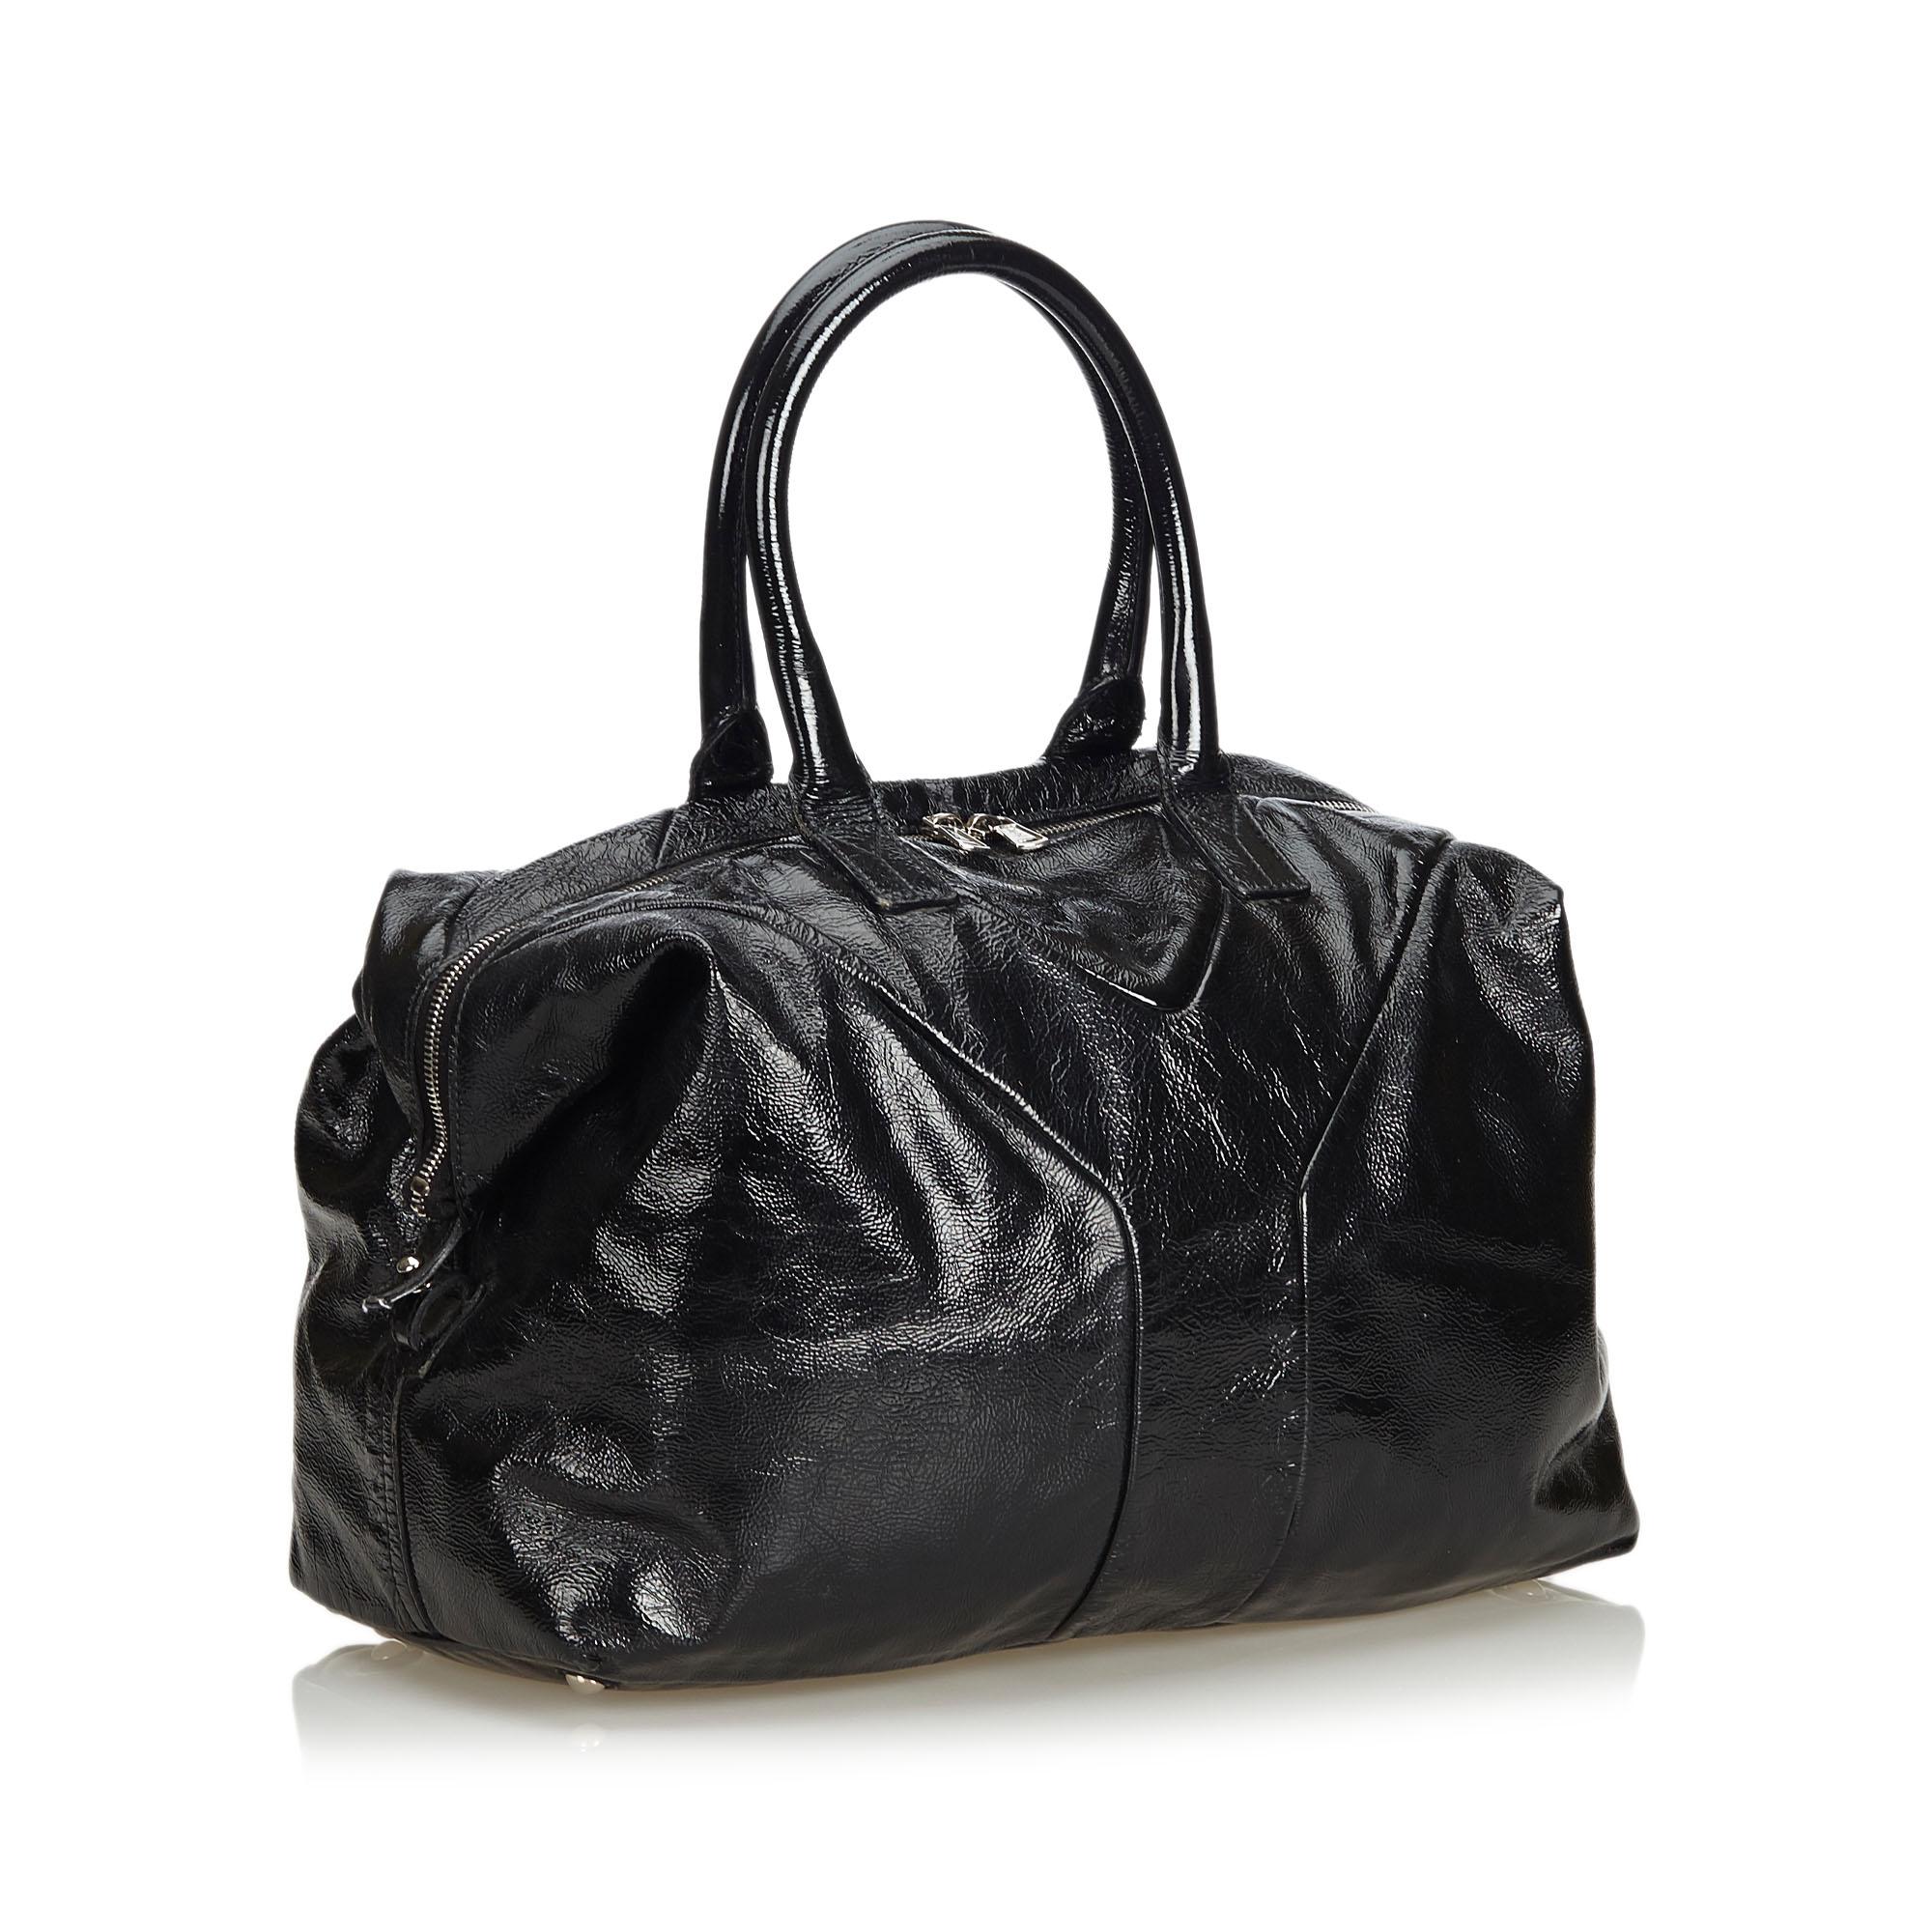 The Easy boston bag features a leather body, rolled leather handles, a two way top zip closure, and an interior zip pocket. It carries as B+ condition rating.

Inclusions: 
Dust Bag

Dimensions:
Length: 30.00 cm
Width: 45.00 cm
Depth: 17.00